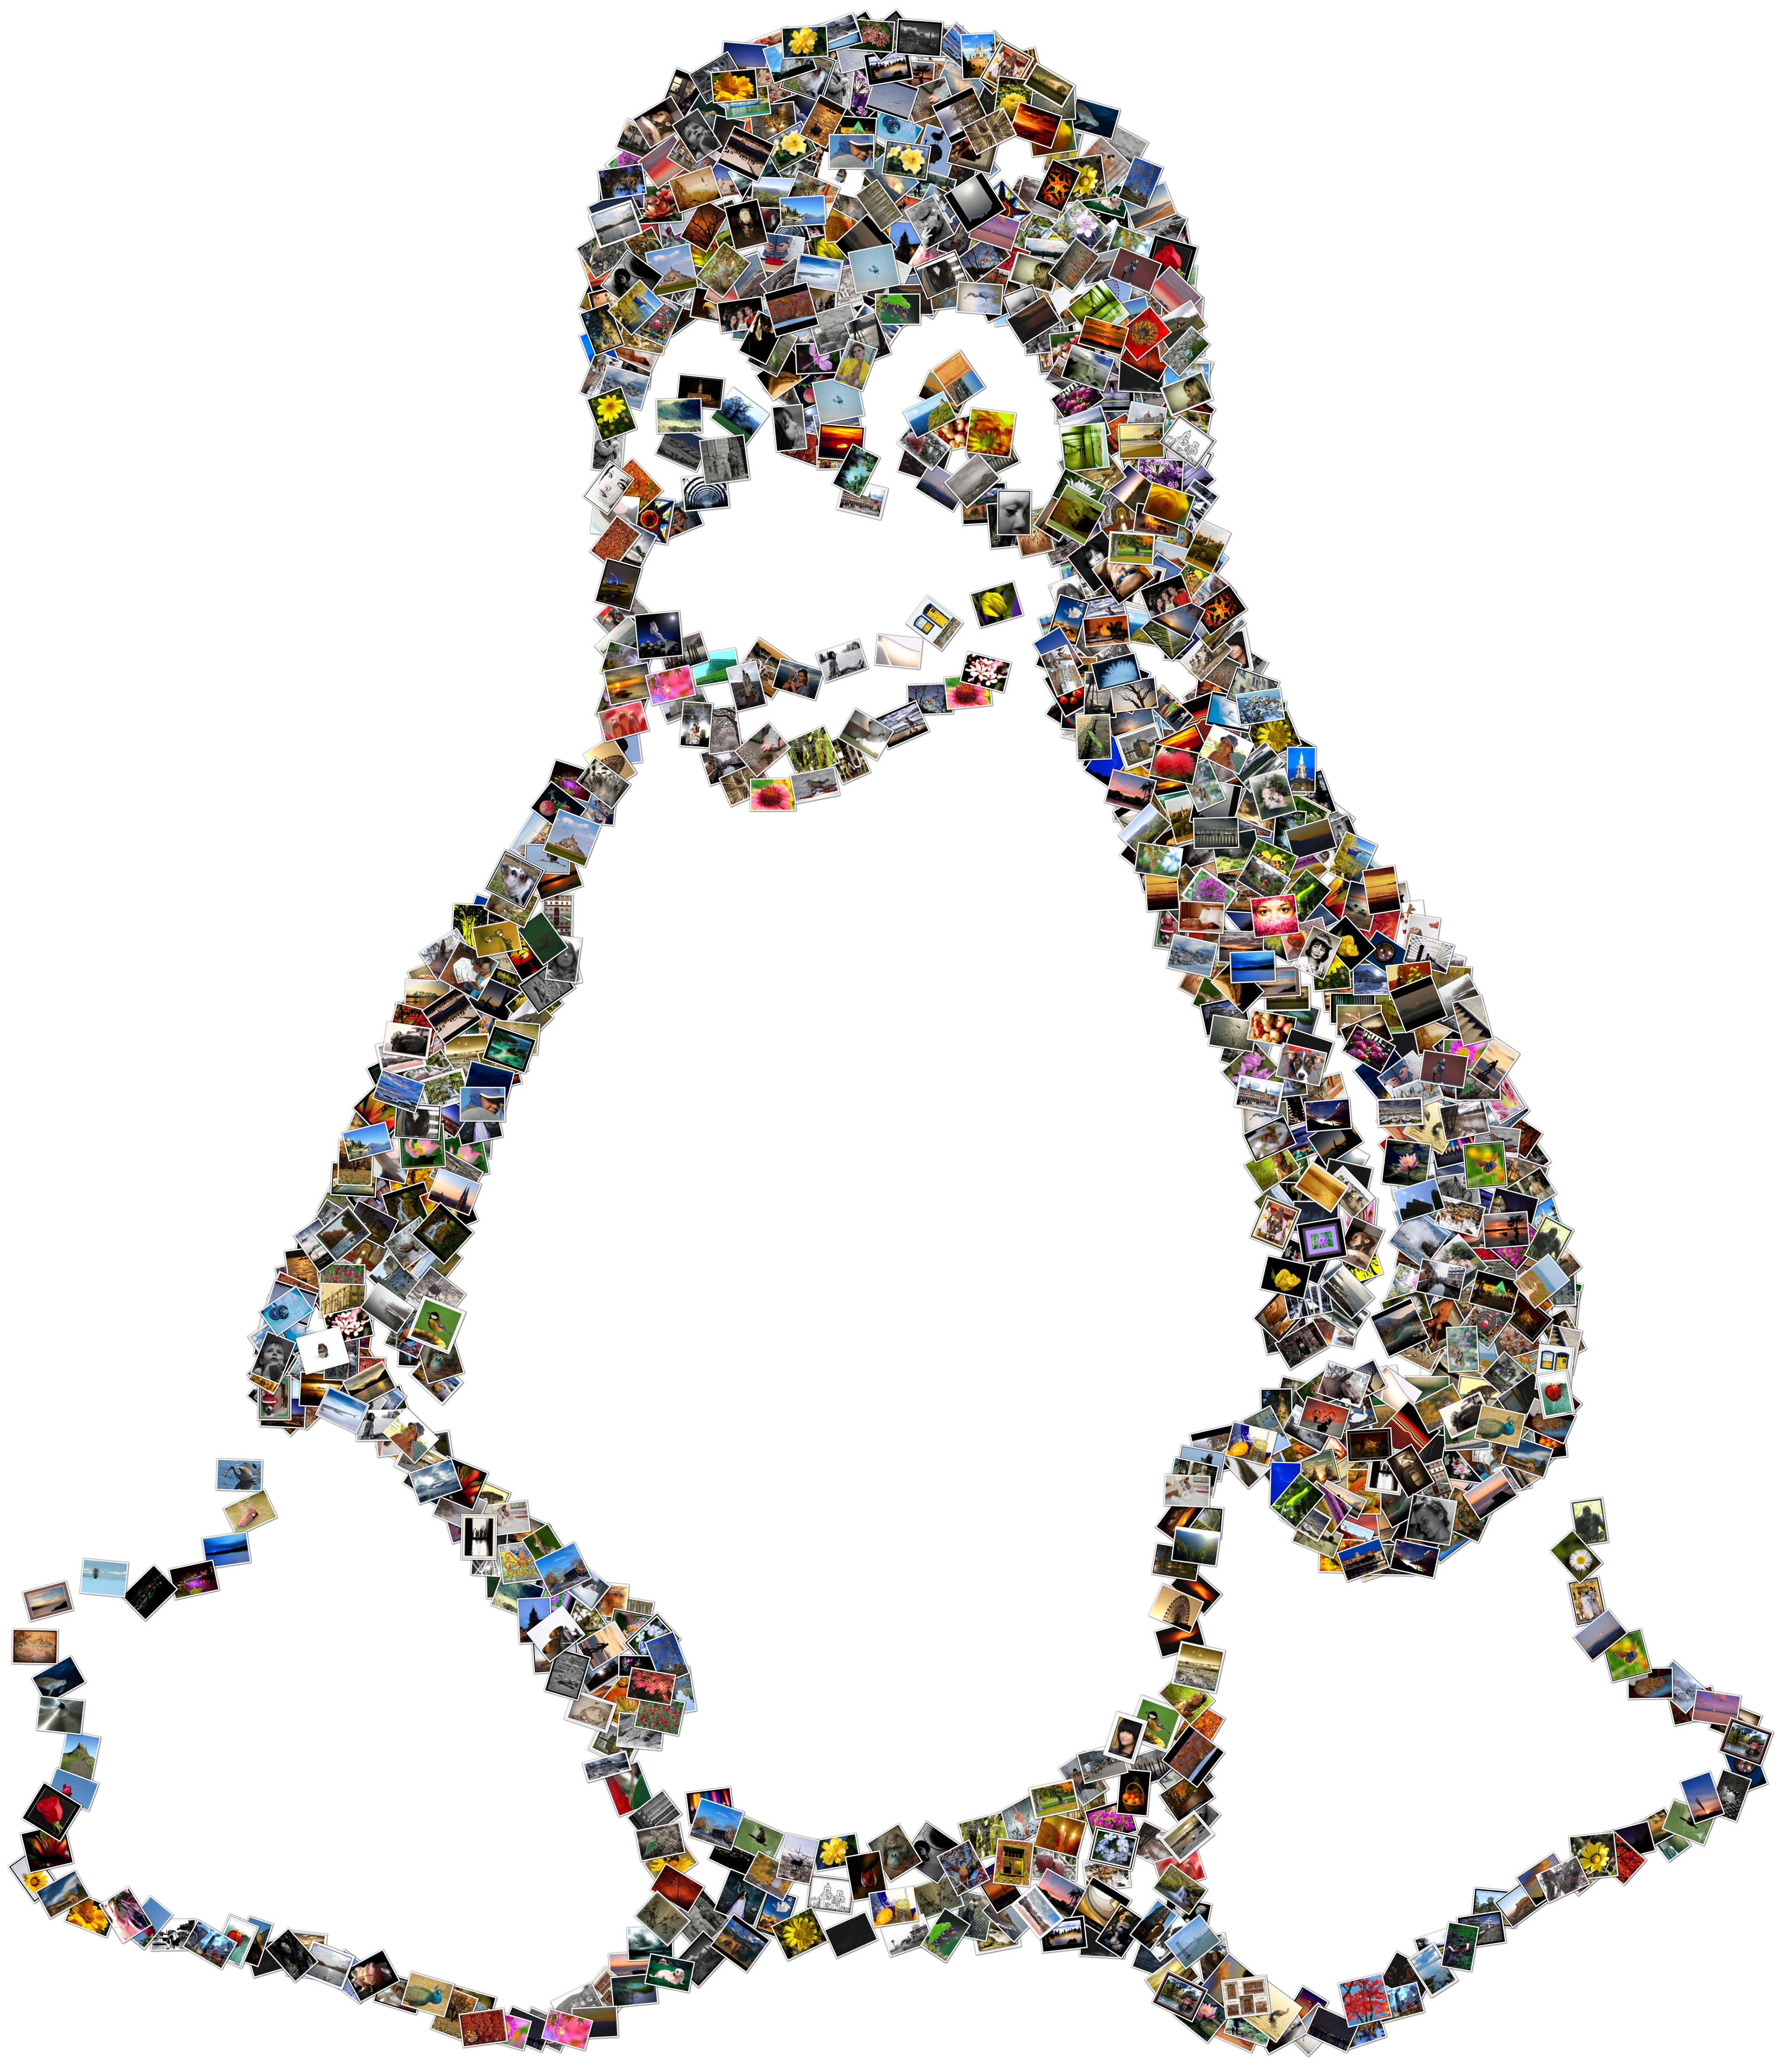 http://www.shapecollage.com/collages/collage-tux.jpg